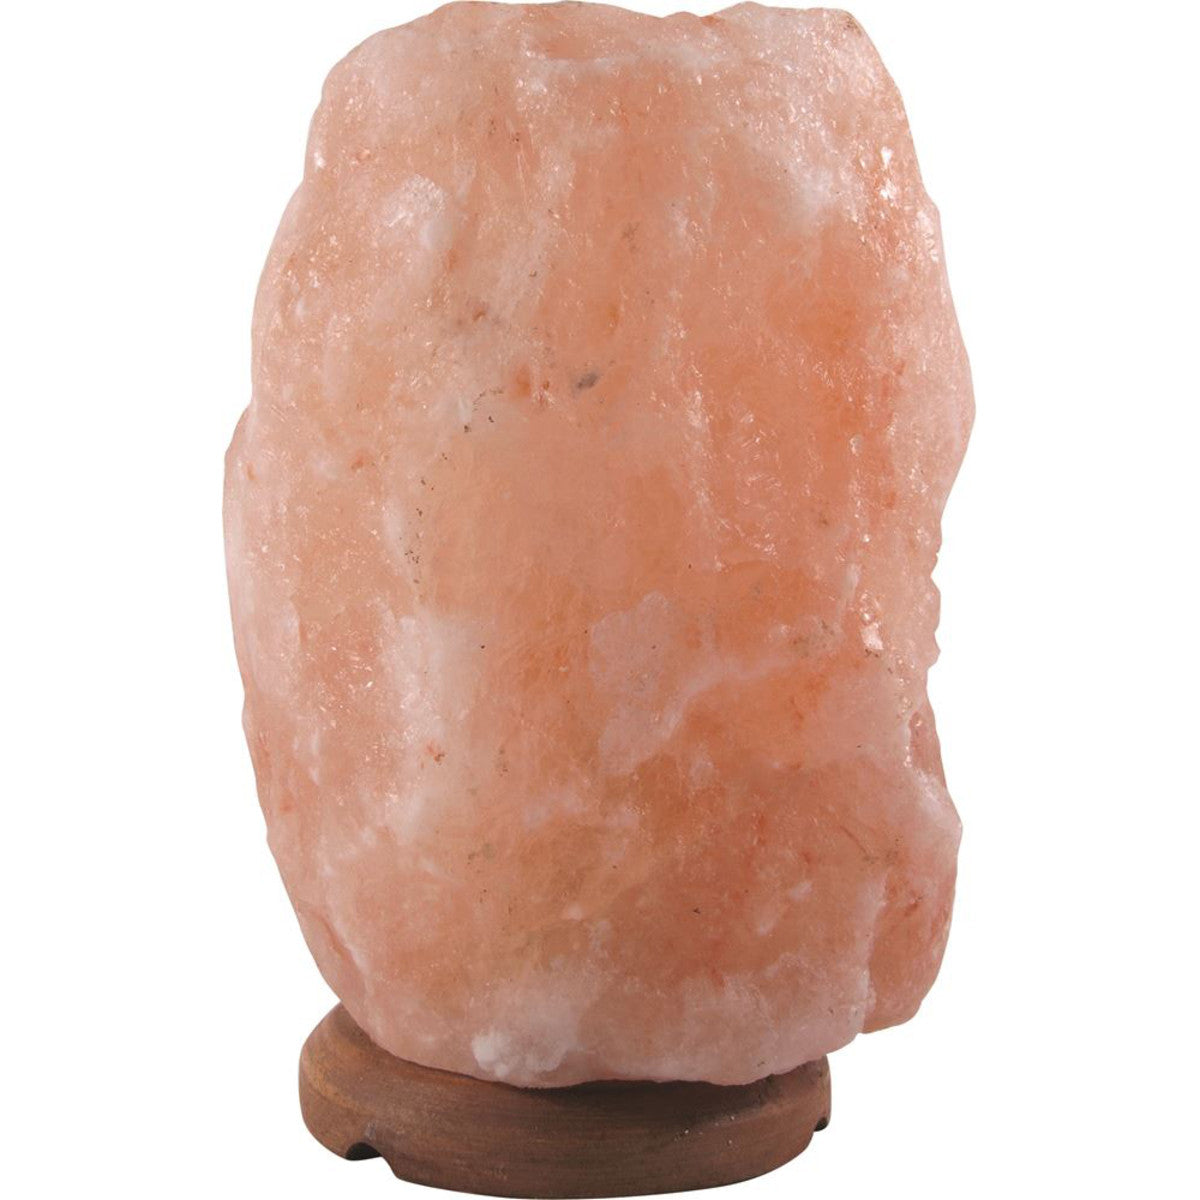 SaltCo Salt Crystal Lamp Small 3 to 4kg